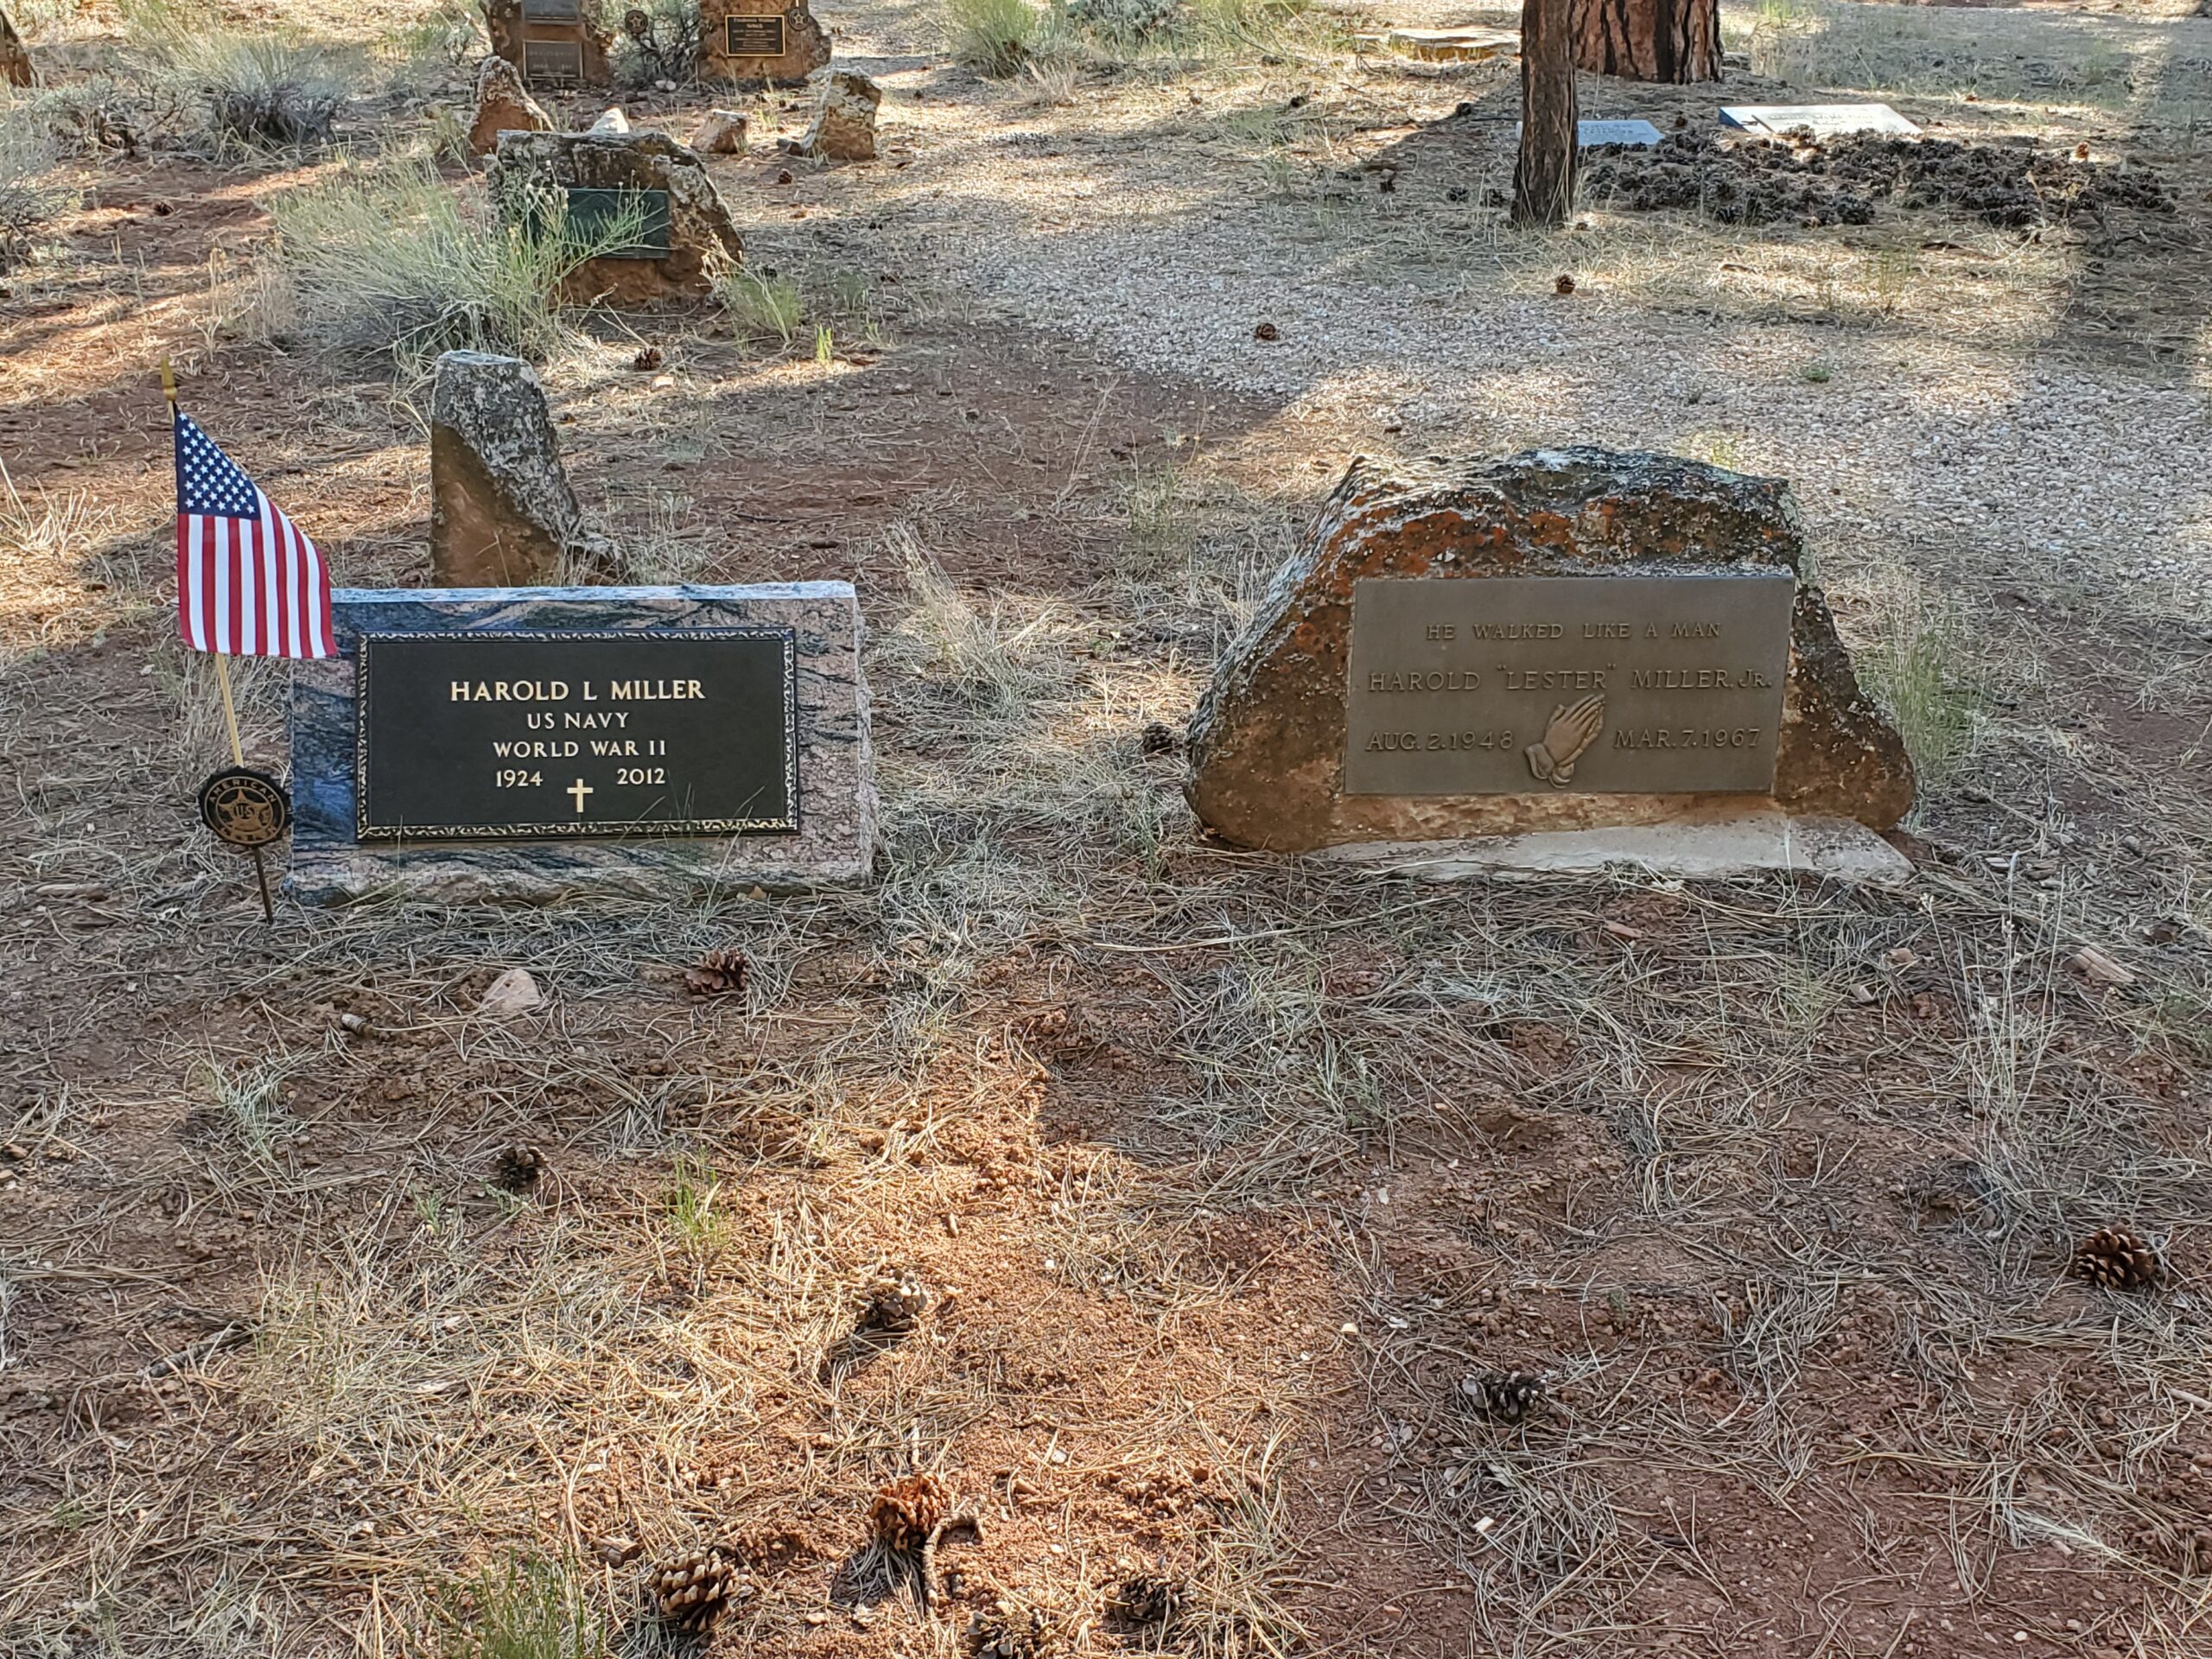 These two headstones are for a father and son buried side by side